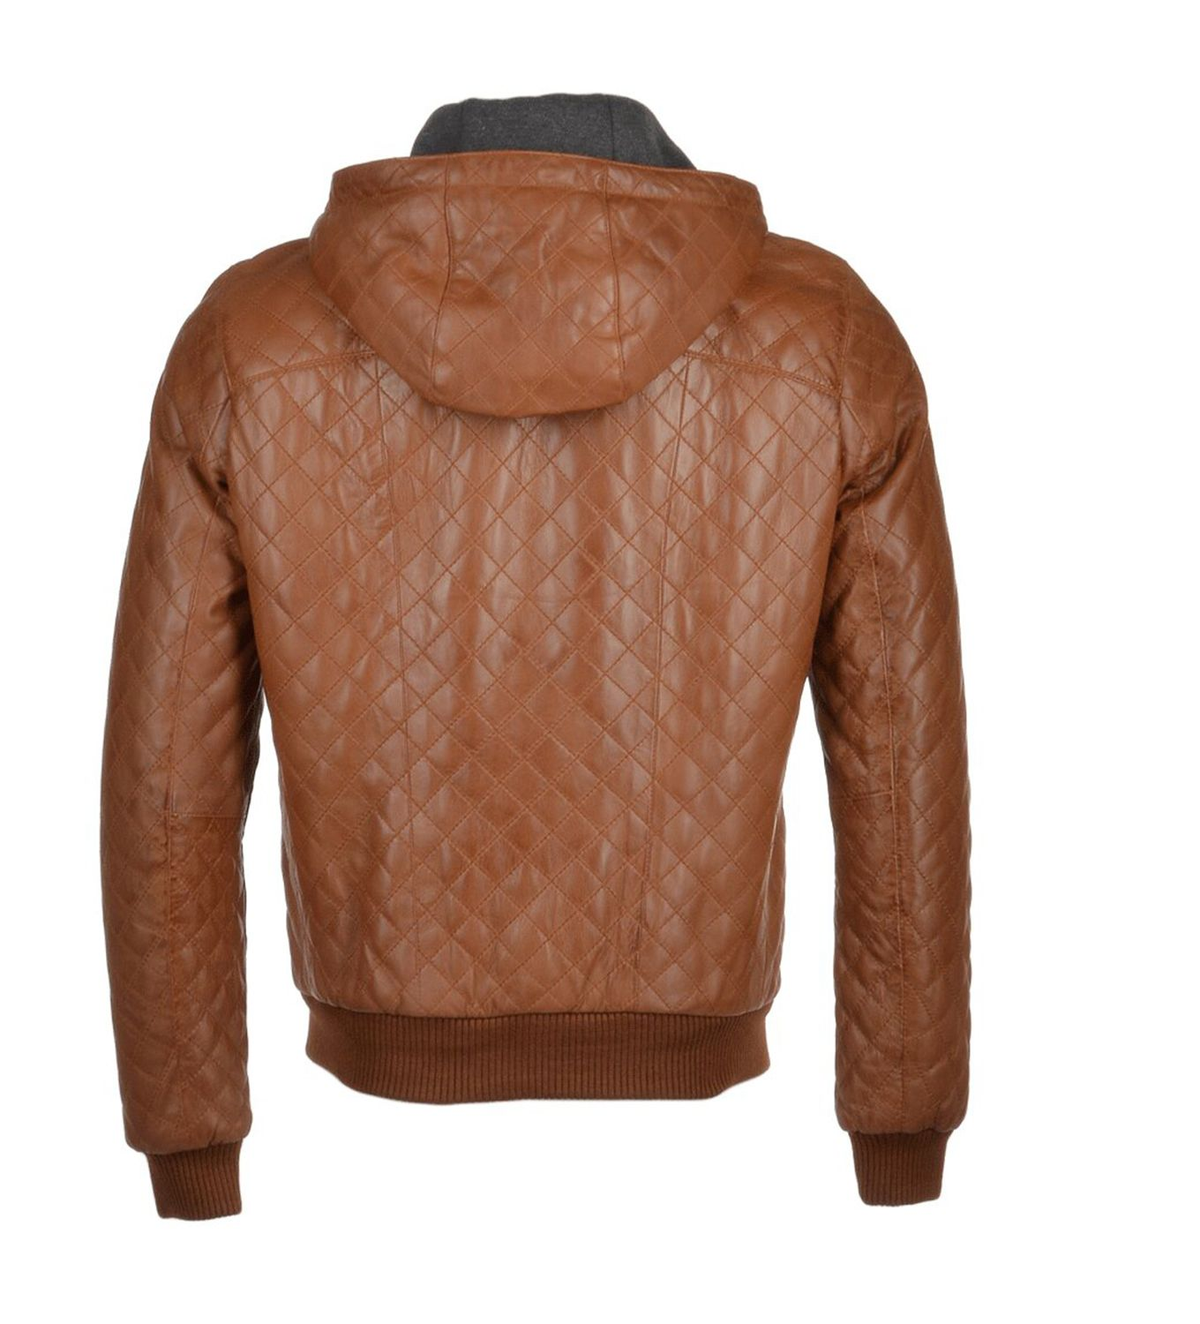 Black and Brown Quilted Leather Jacket | Elite Jacket